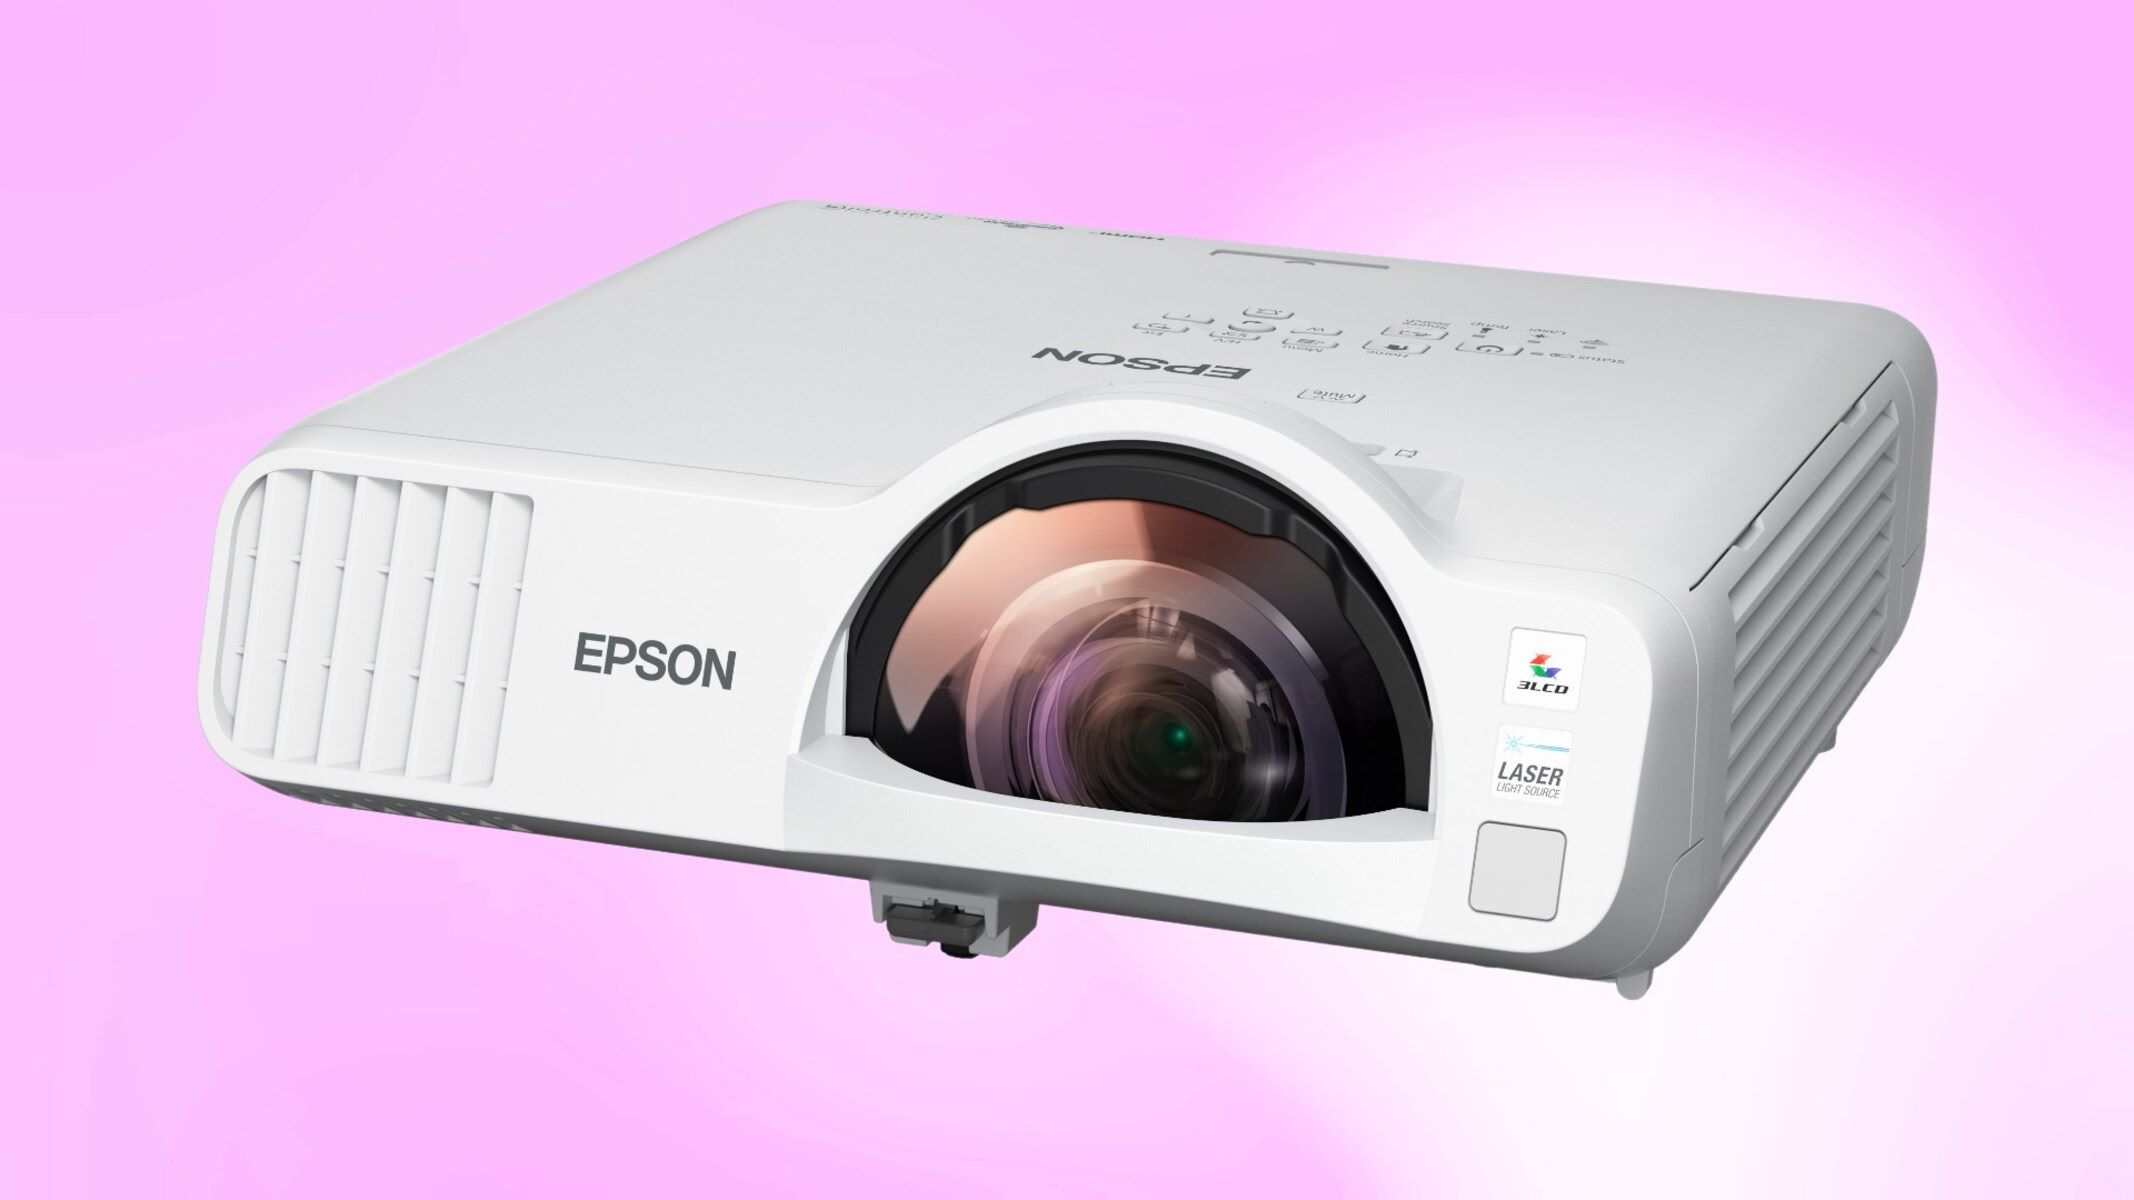 Connecting IPhone To Epson Projector: Easy Setup Guide